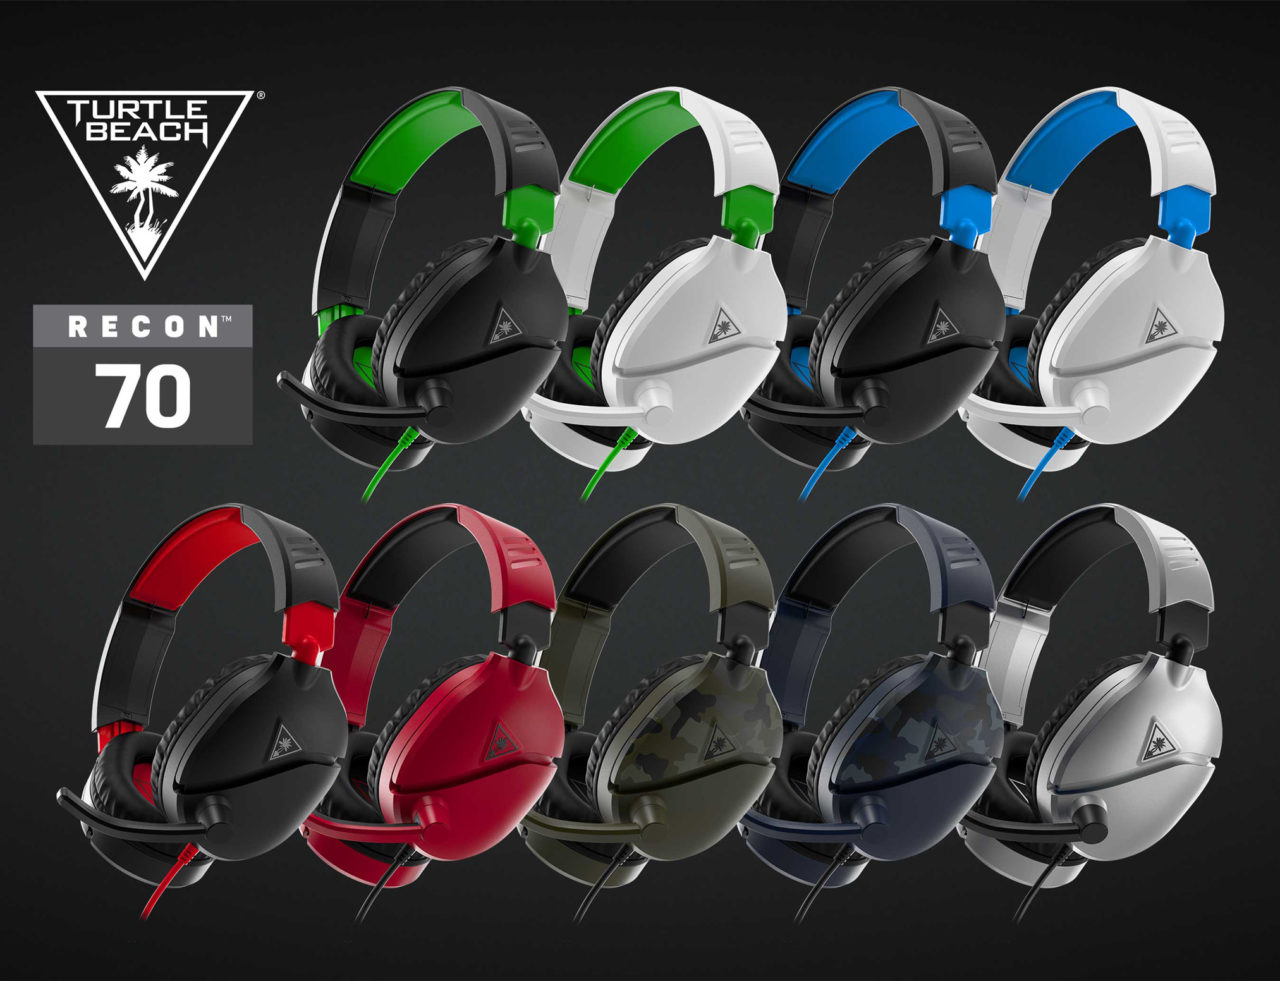 Recon 70 product image (Turtle Beach)